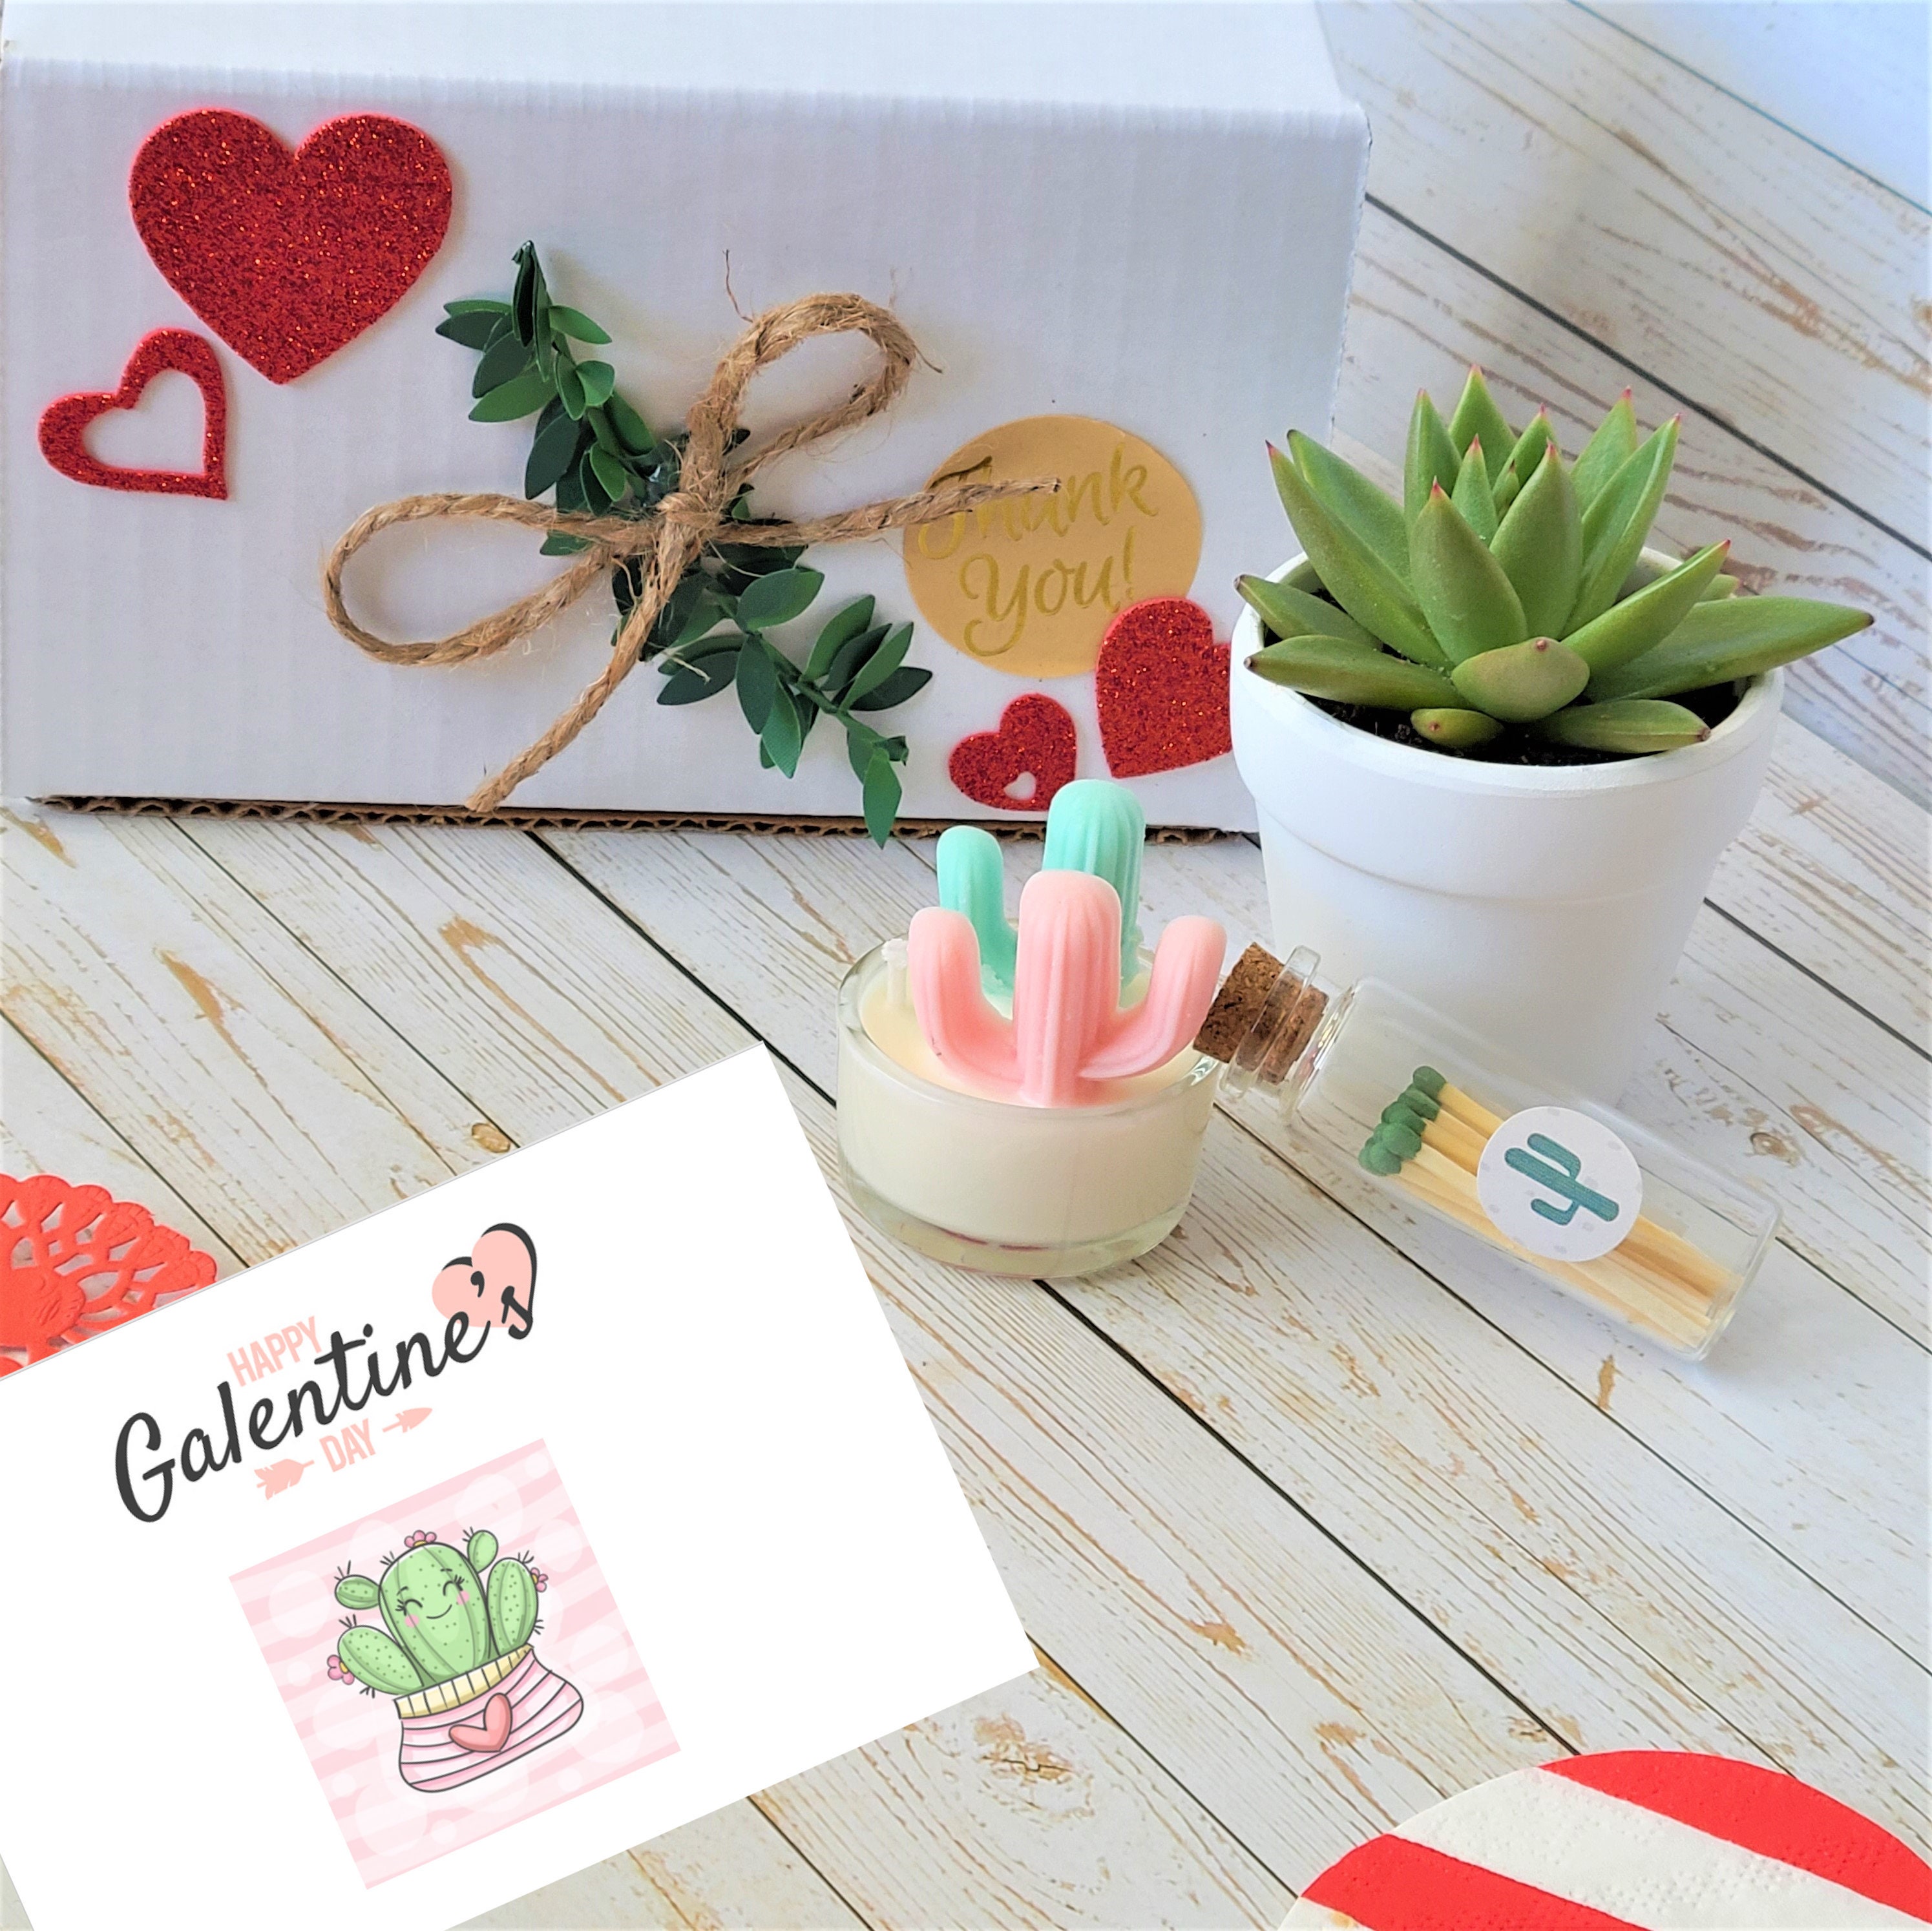 GALENTINES DAY Gift Box Wife Gift Candle Roses and Stuffed Bear Galentine Sweetheart Gift Cute Galentines Girlfriend Gift